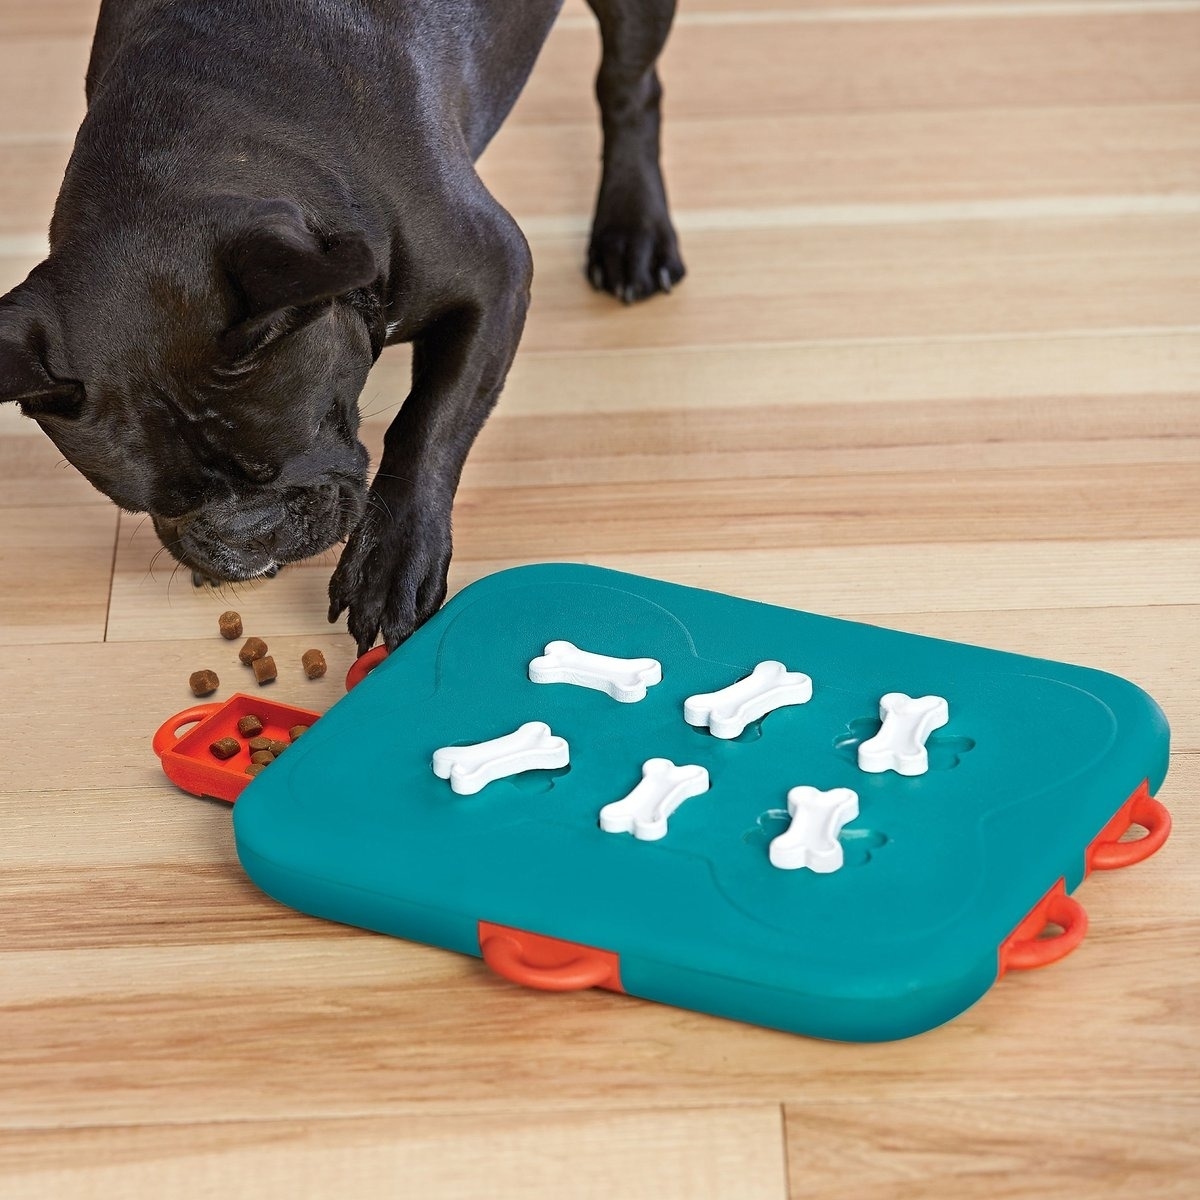 A small dog interacts with a dog puzzle toy on a hardwood floor, with some kibble scattered around